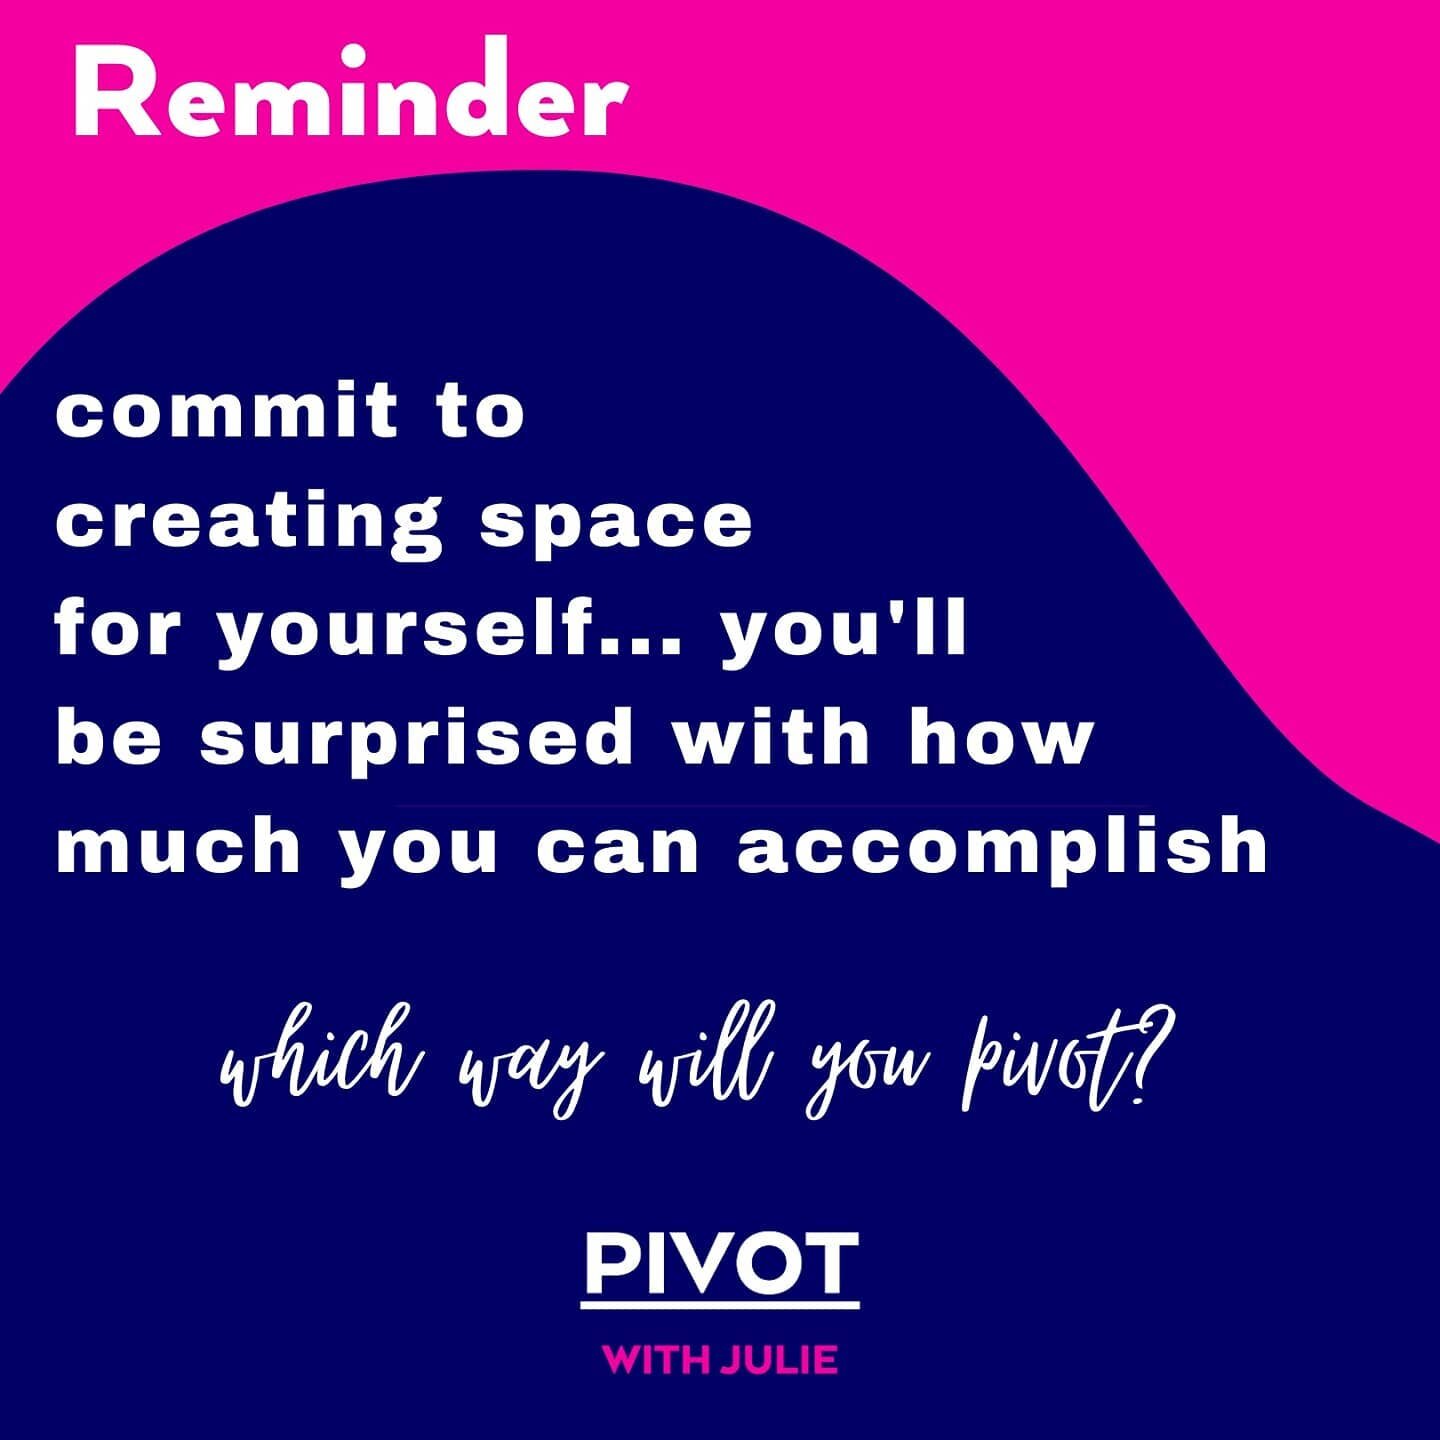 Do you make space for others, but not yourself? Let's change that! Schedule your free discovery session today.
.
.
.
.
#coaching #coach #performancecoach #executivecoach #executivecoaching #pivotwithjulie #leader #leadershipcoaching #leadership #lead